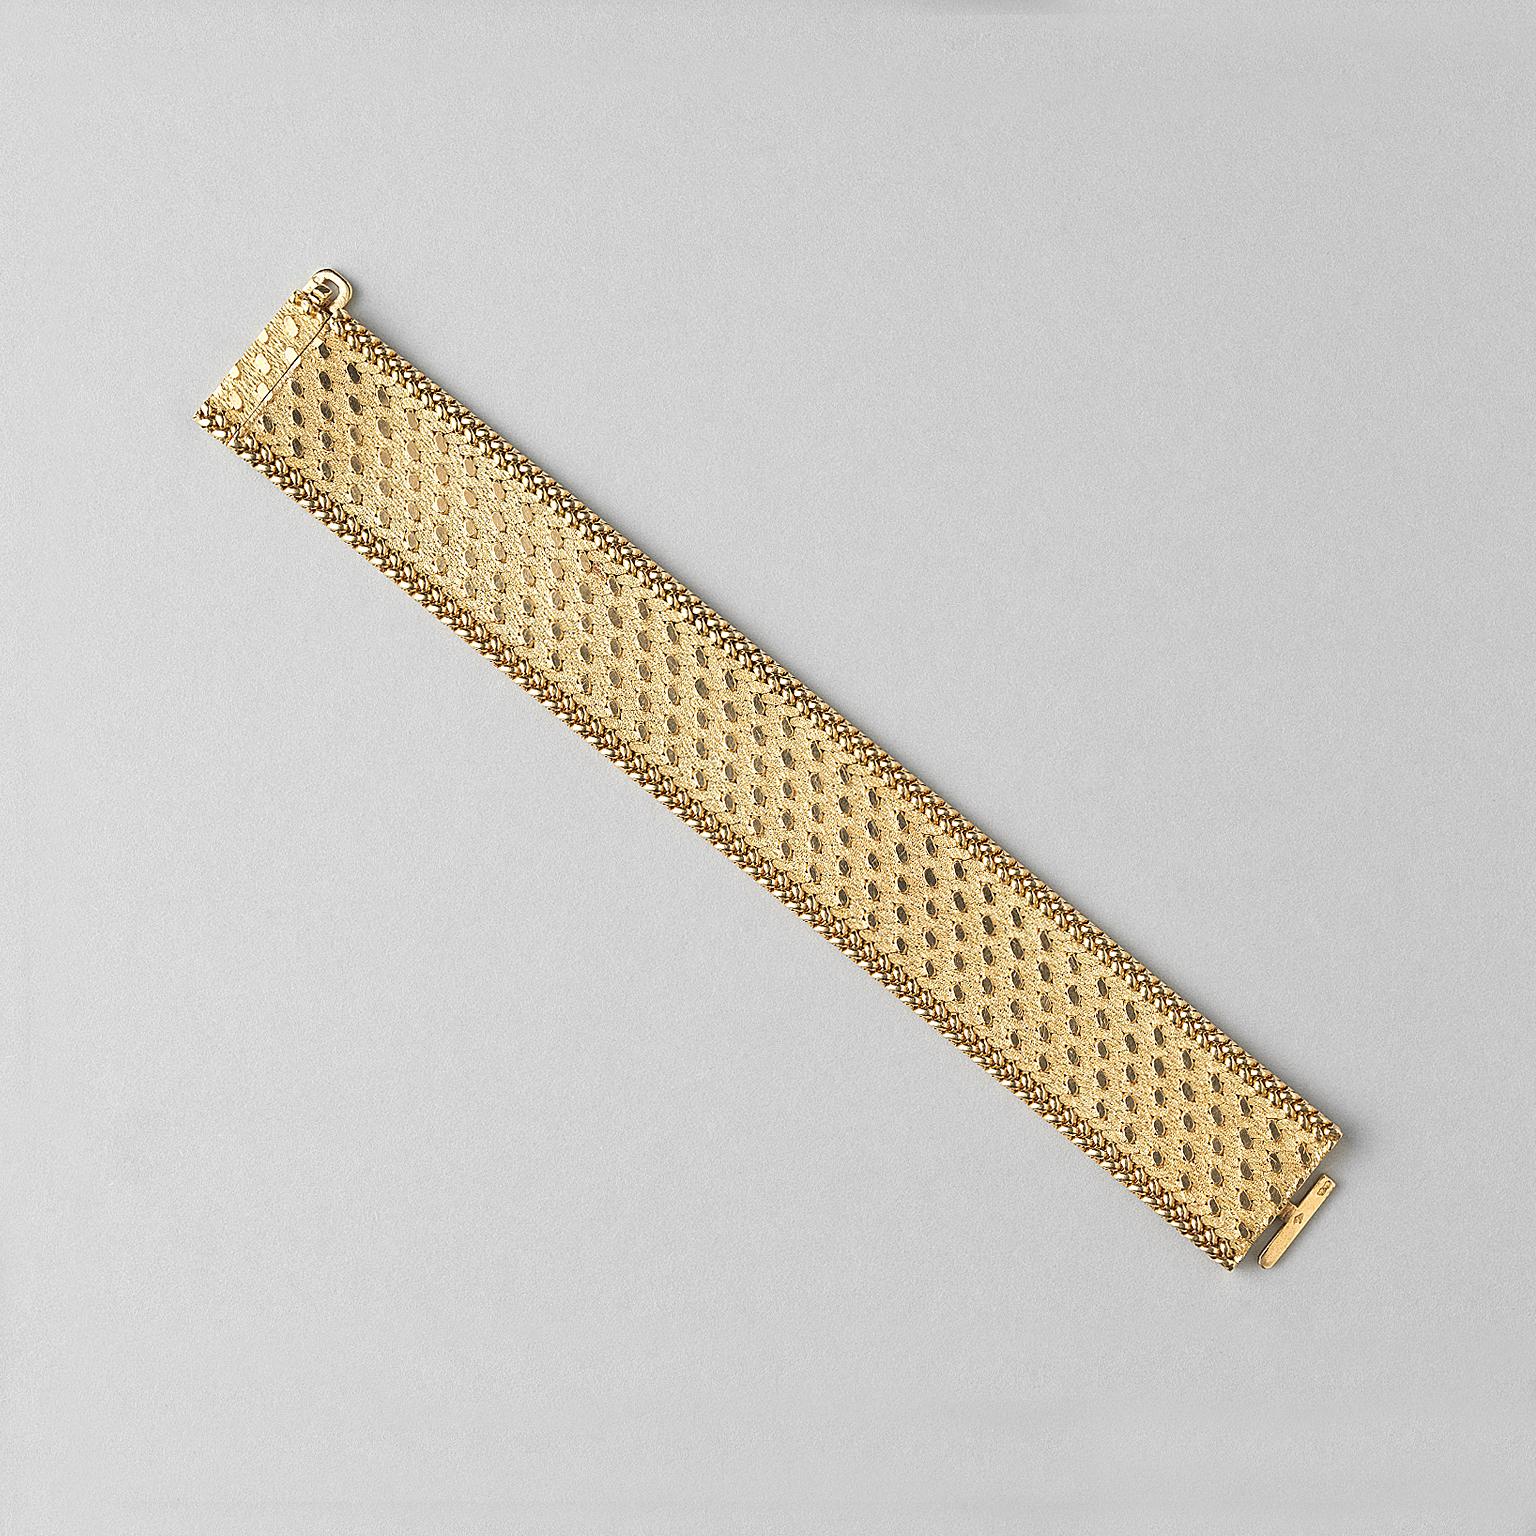 An 18 carat gold flat mesh woven bracelet with a matte textured gold background formed of hammered links with a contrasting geometric raised pattern in polished oval gold dots with a polished braided gold border, with concealed tongue and box clasp,